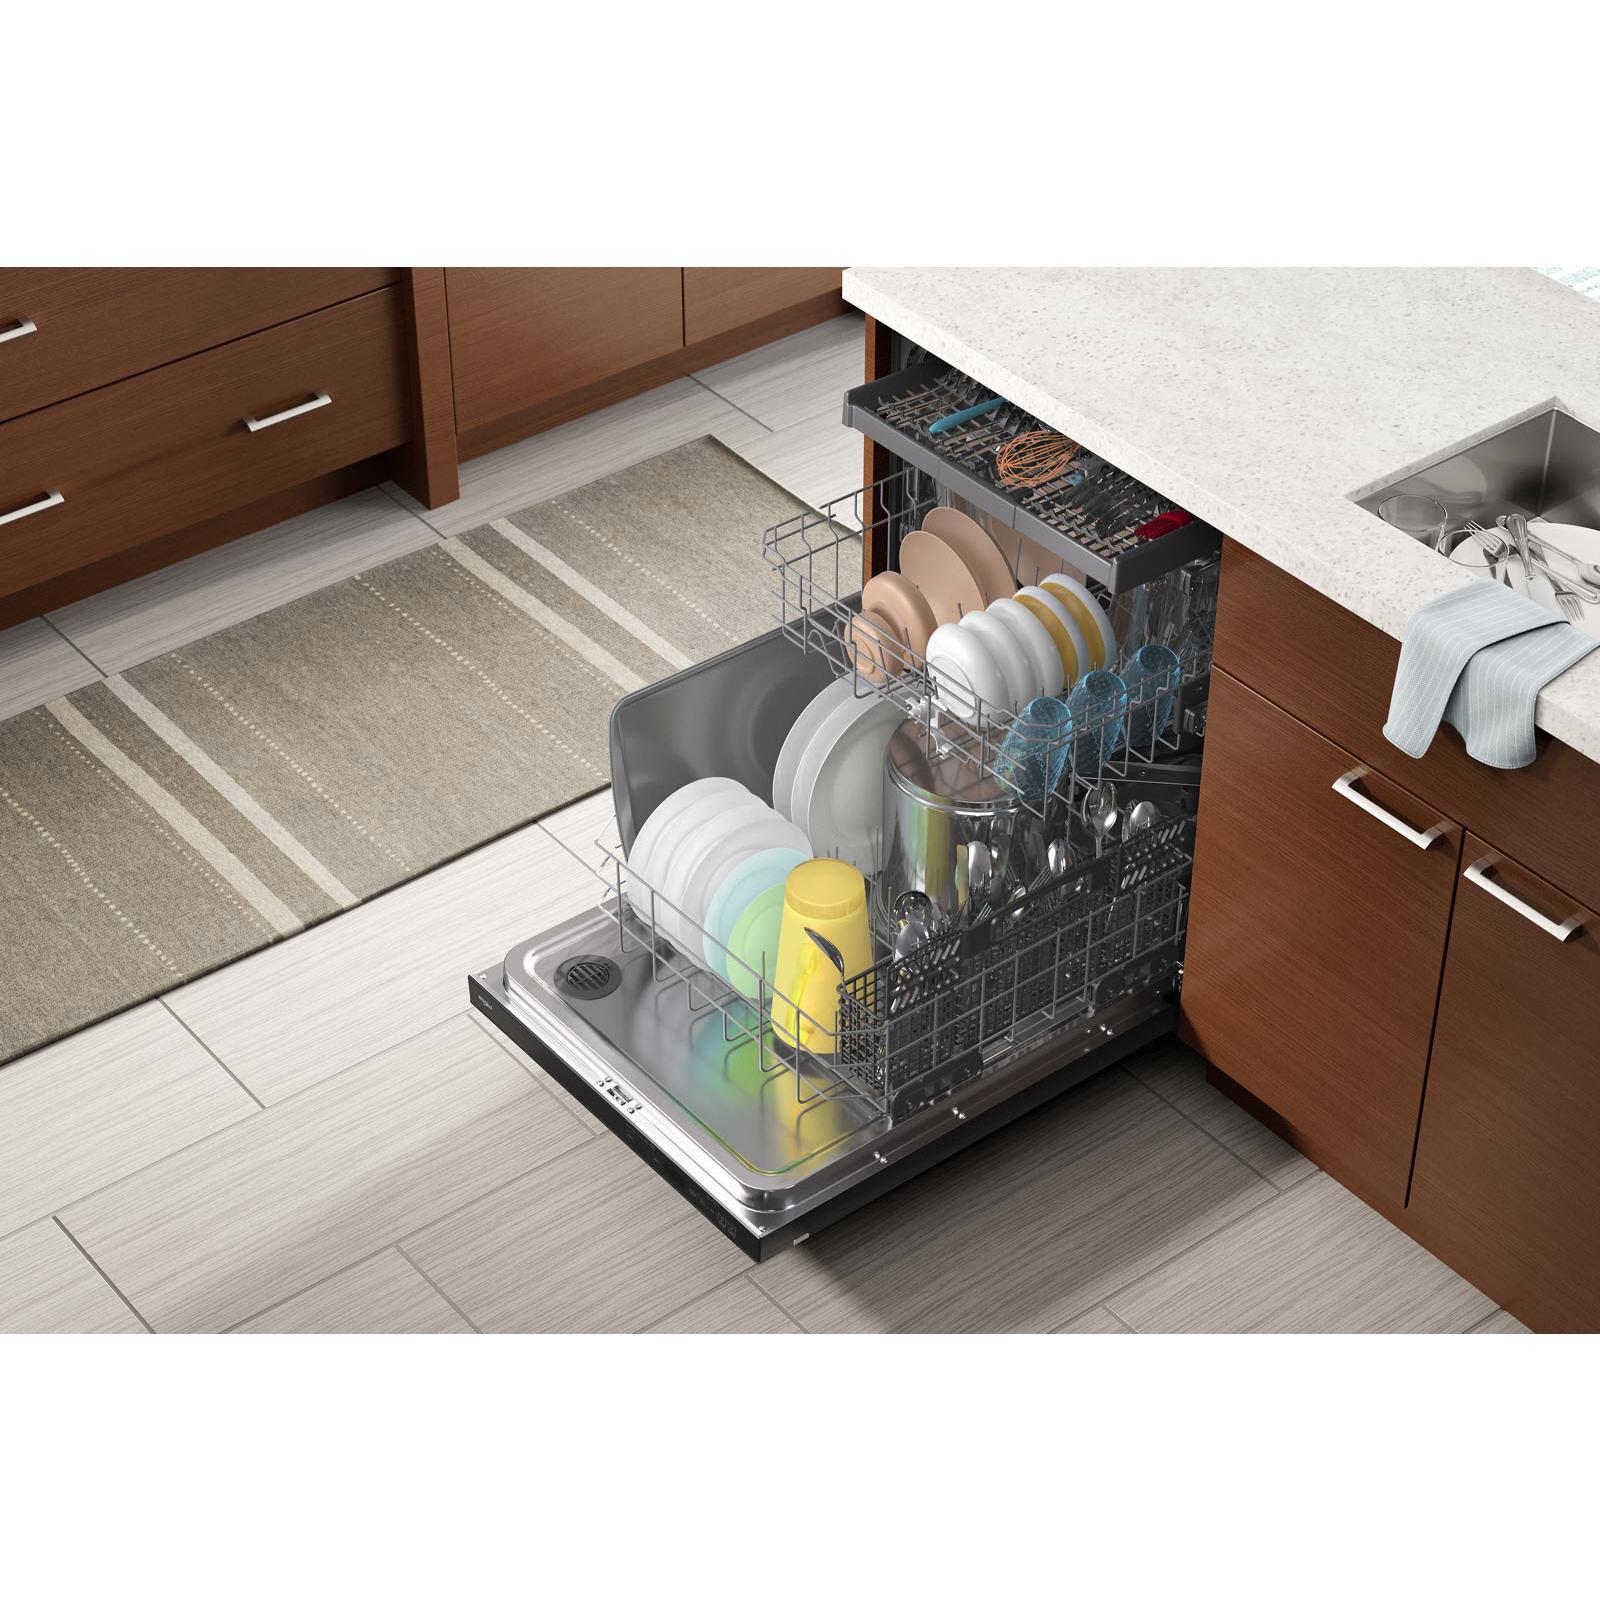 Whirlpool 24-inch Built-in Dishwasher with Sani Rinse Option WDT750SAKB